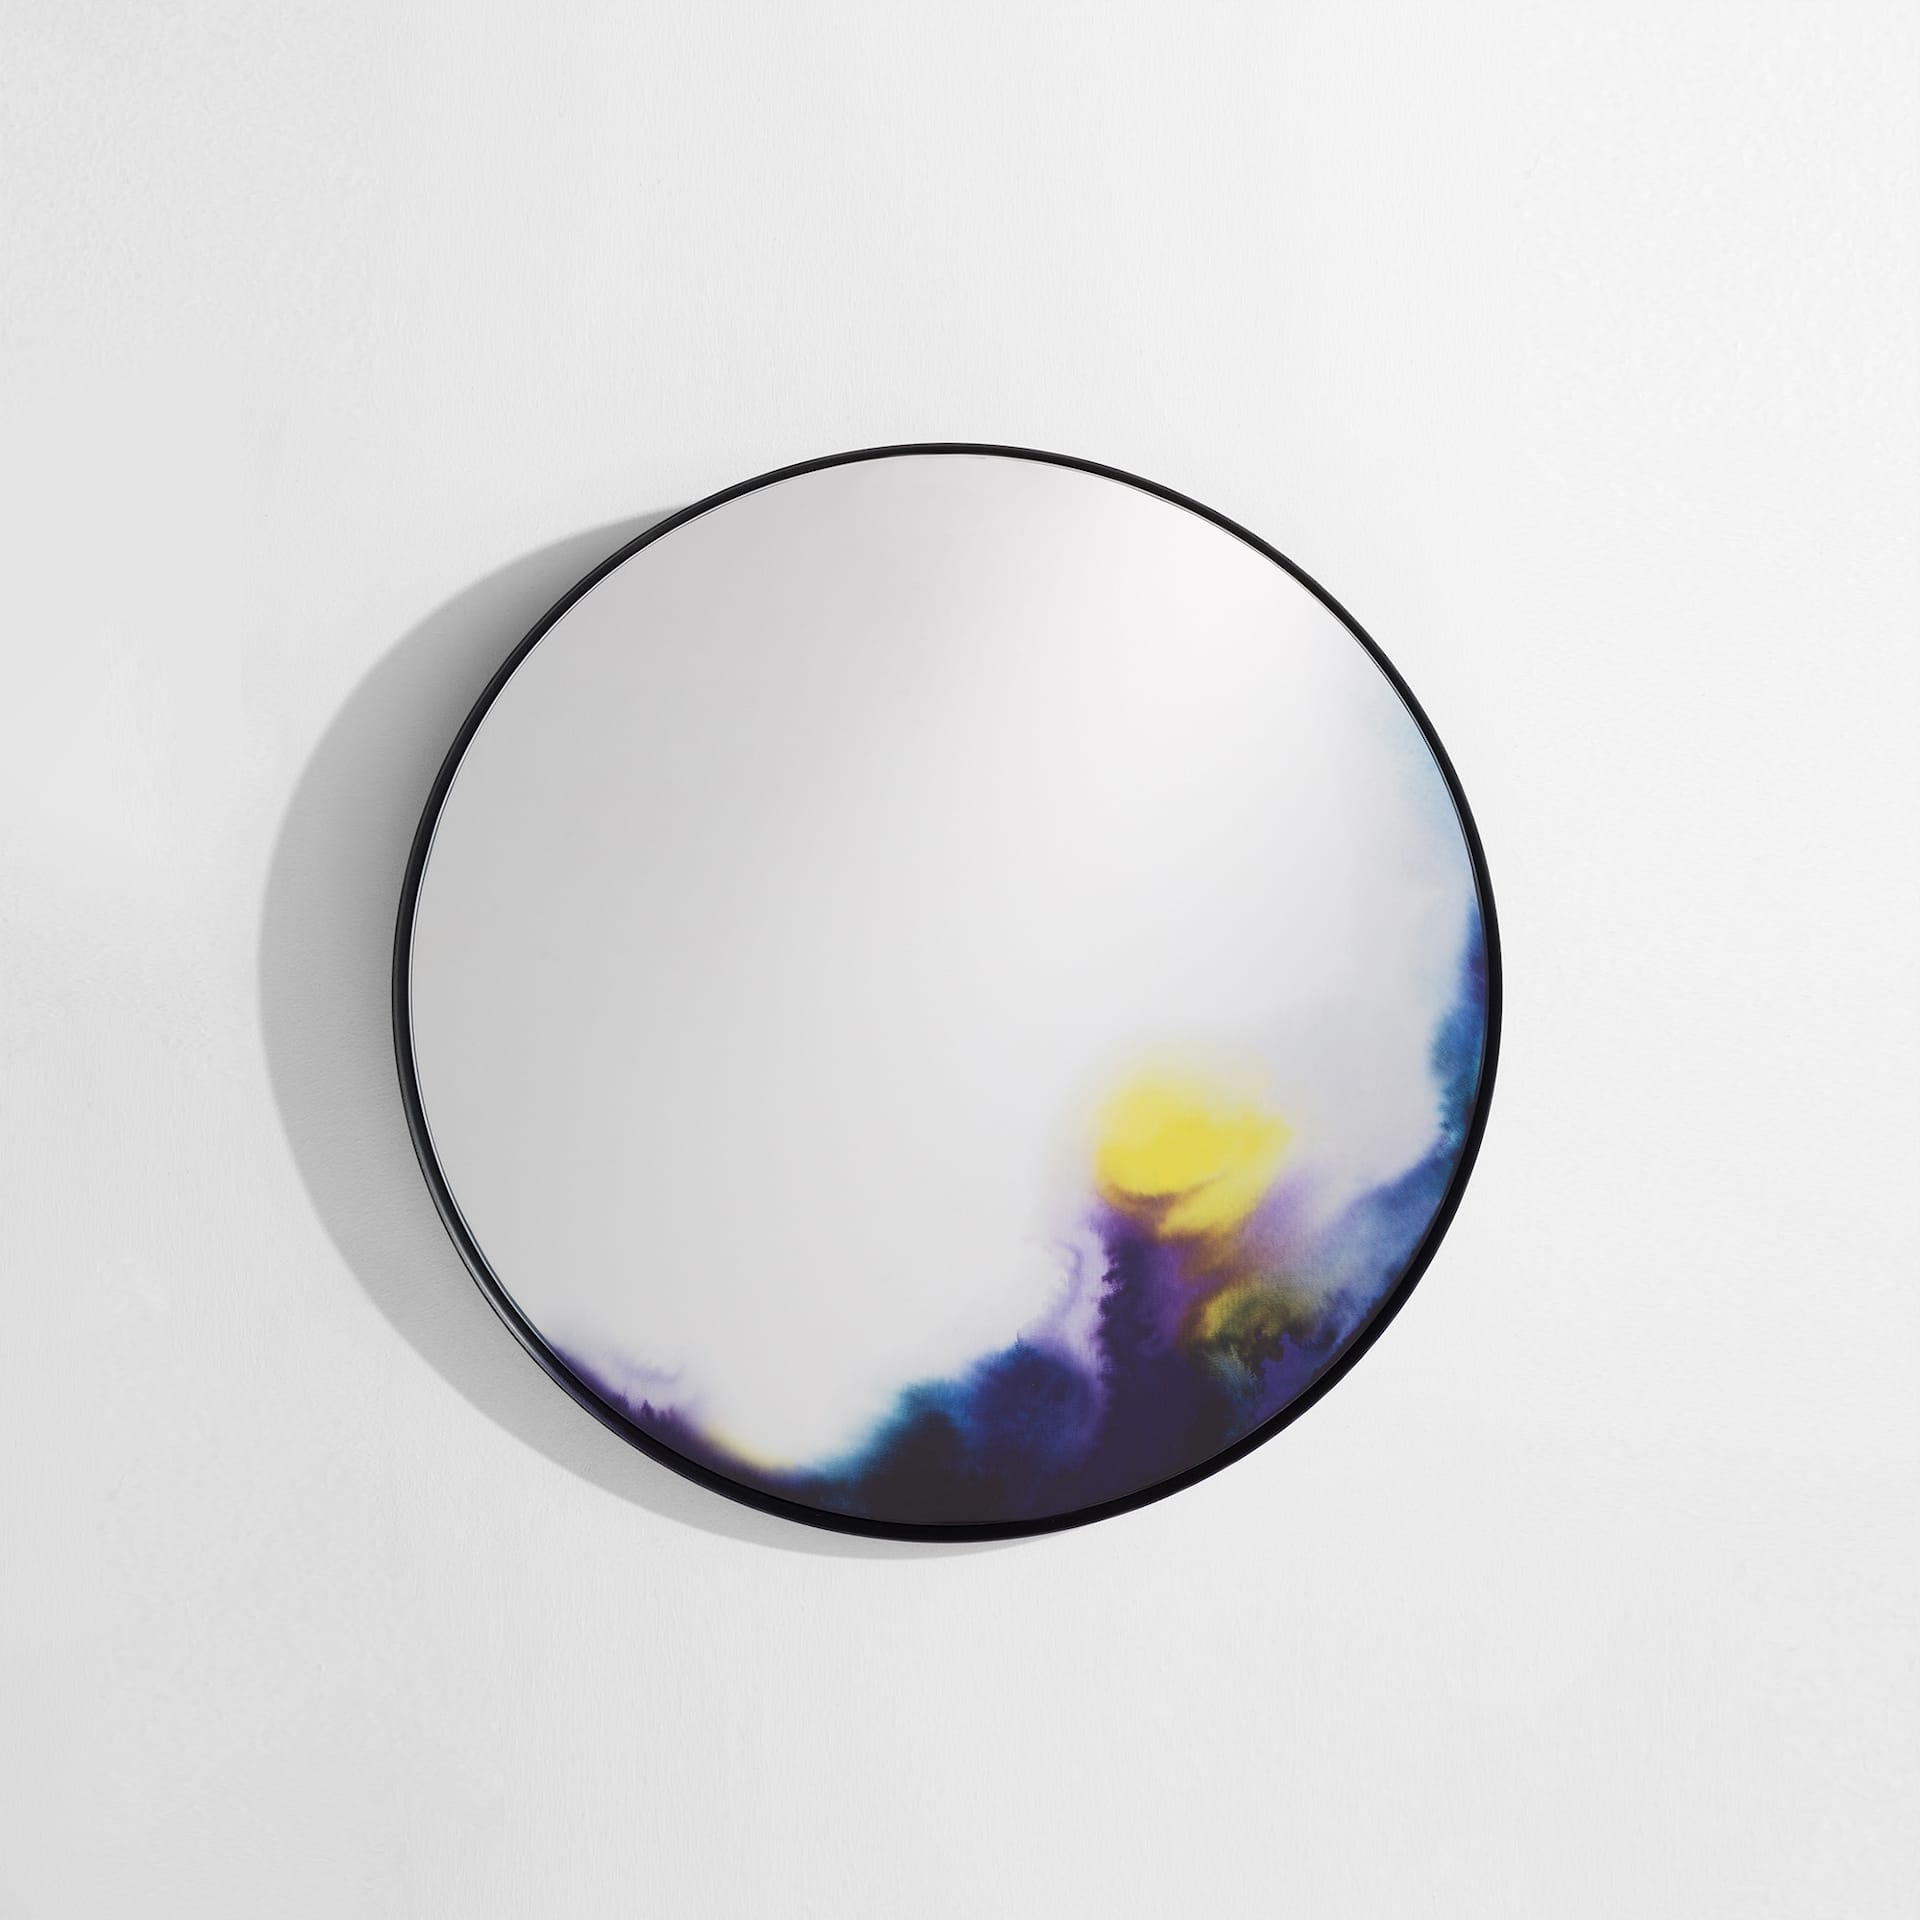 Francis Wall Mirror - Petite Friture - Constance Guisset - NO GA